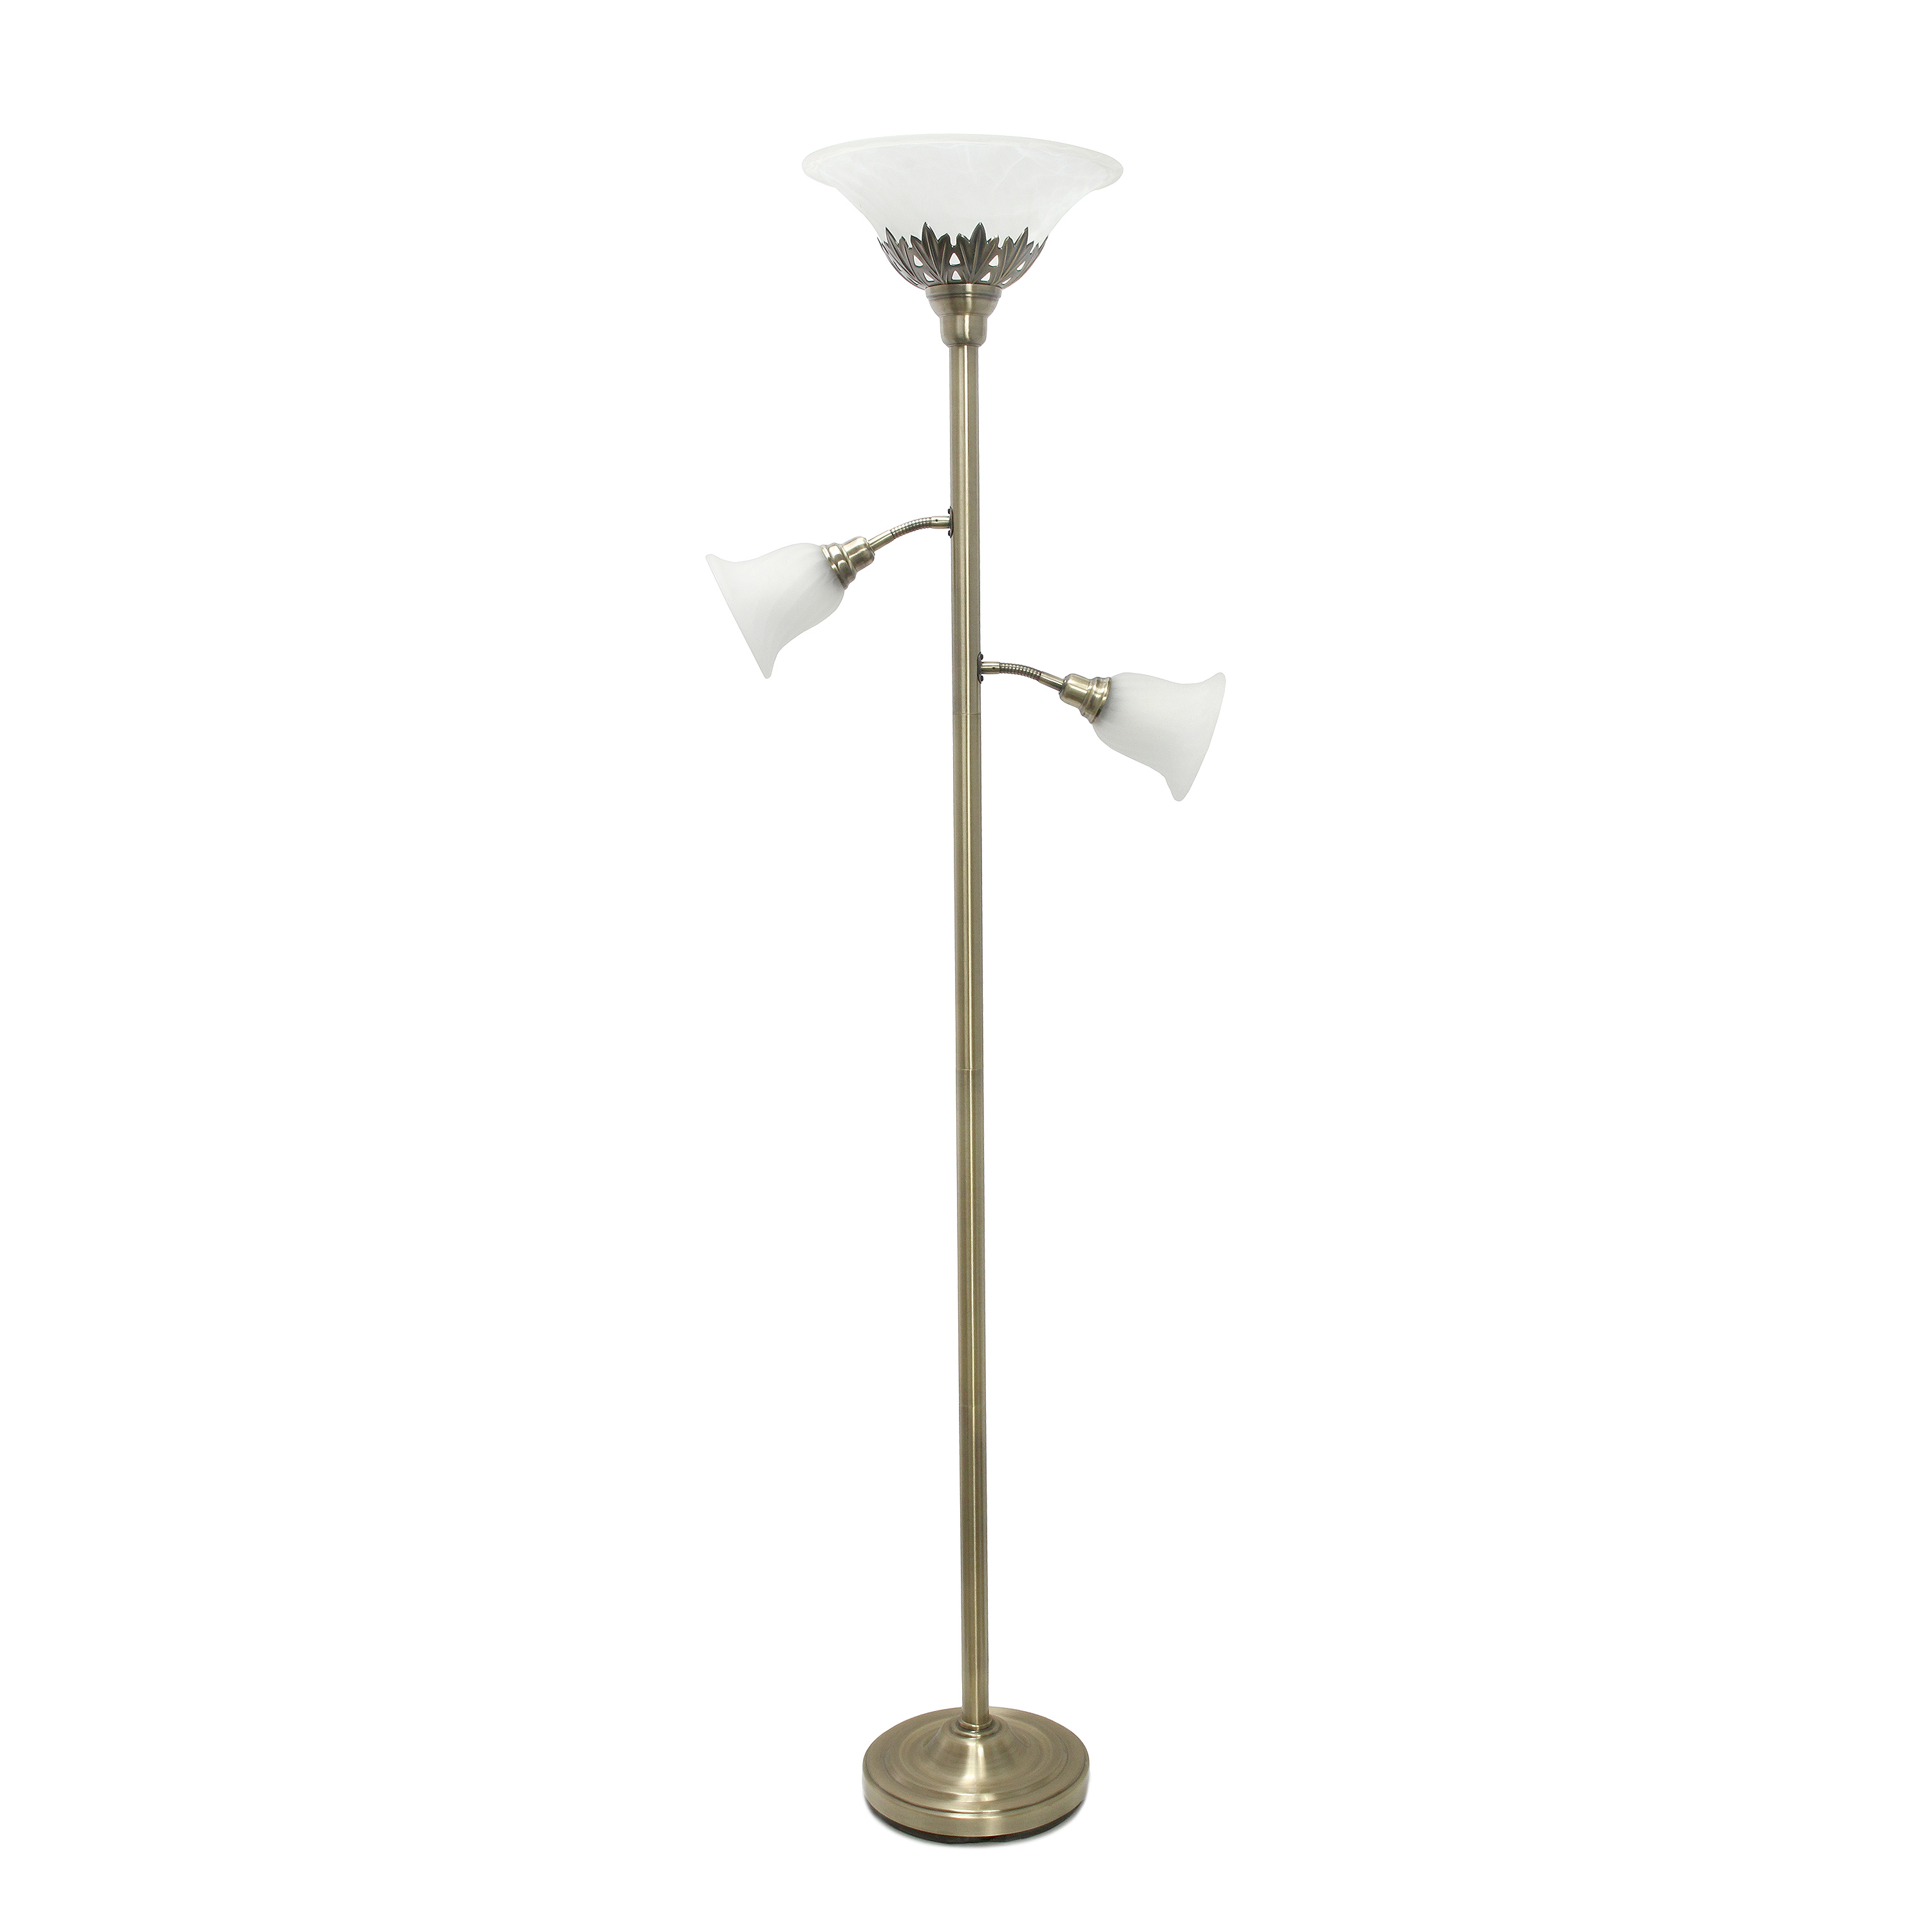 Lalia Home Torchiere Floor Lamp with 2 Reading Lights and Scalloped Glass Shades, Antique Brass